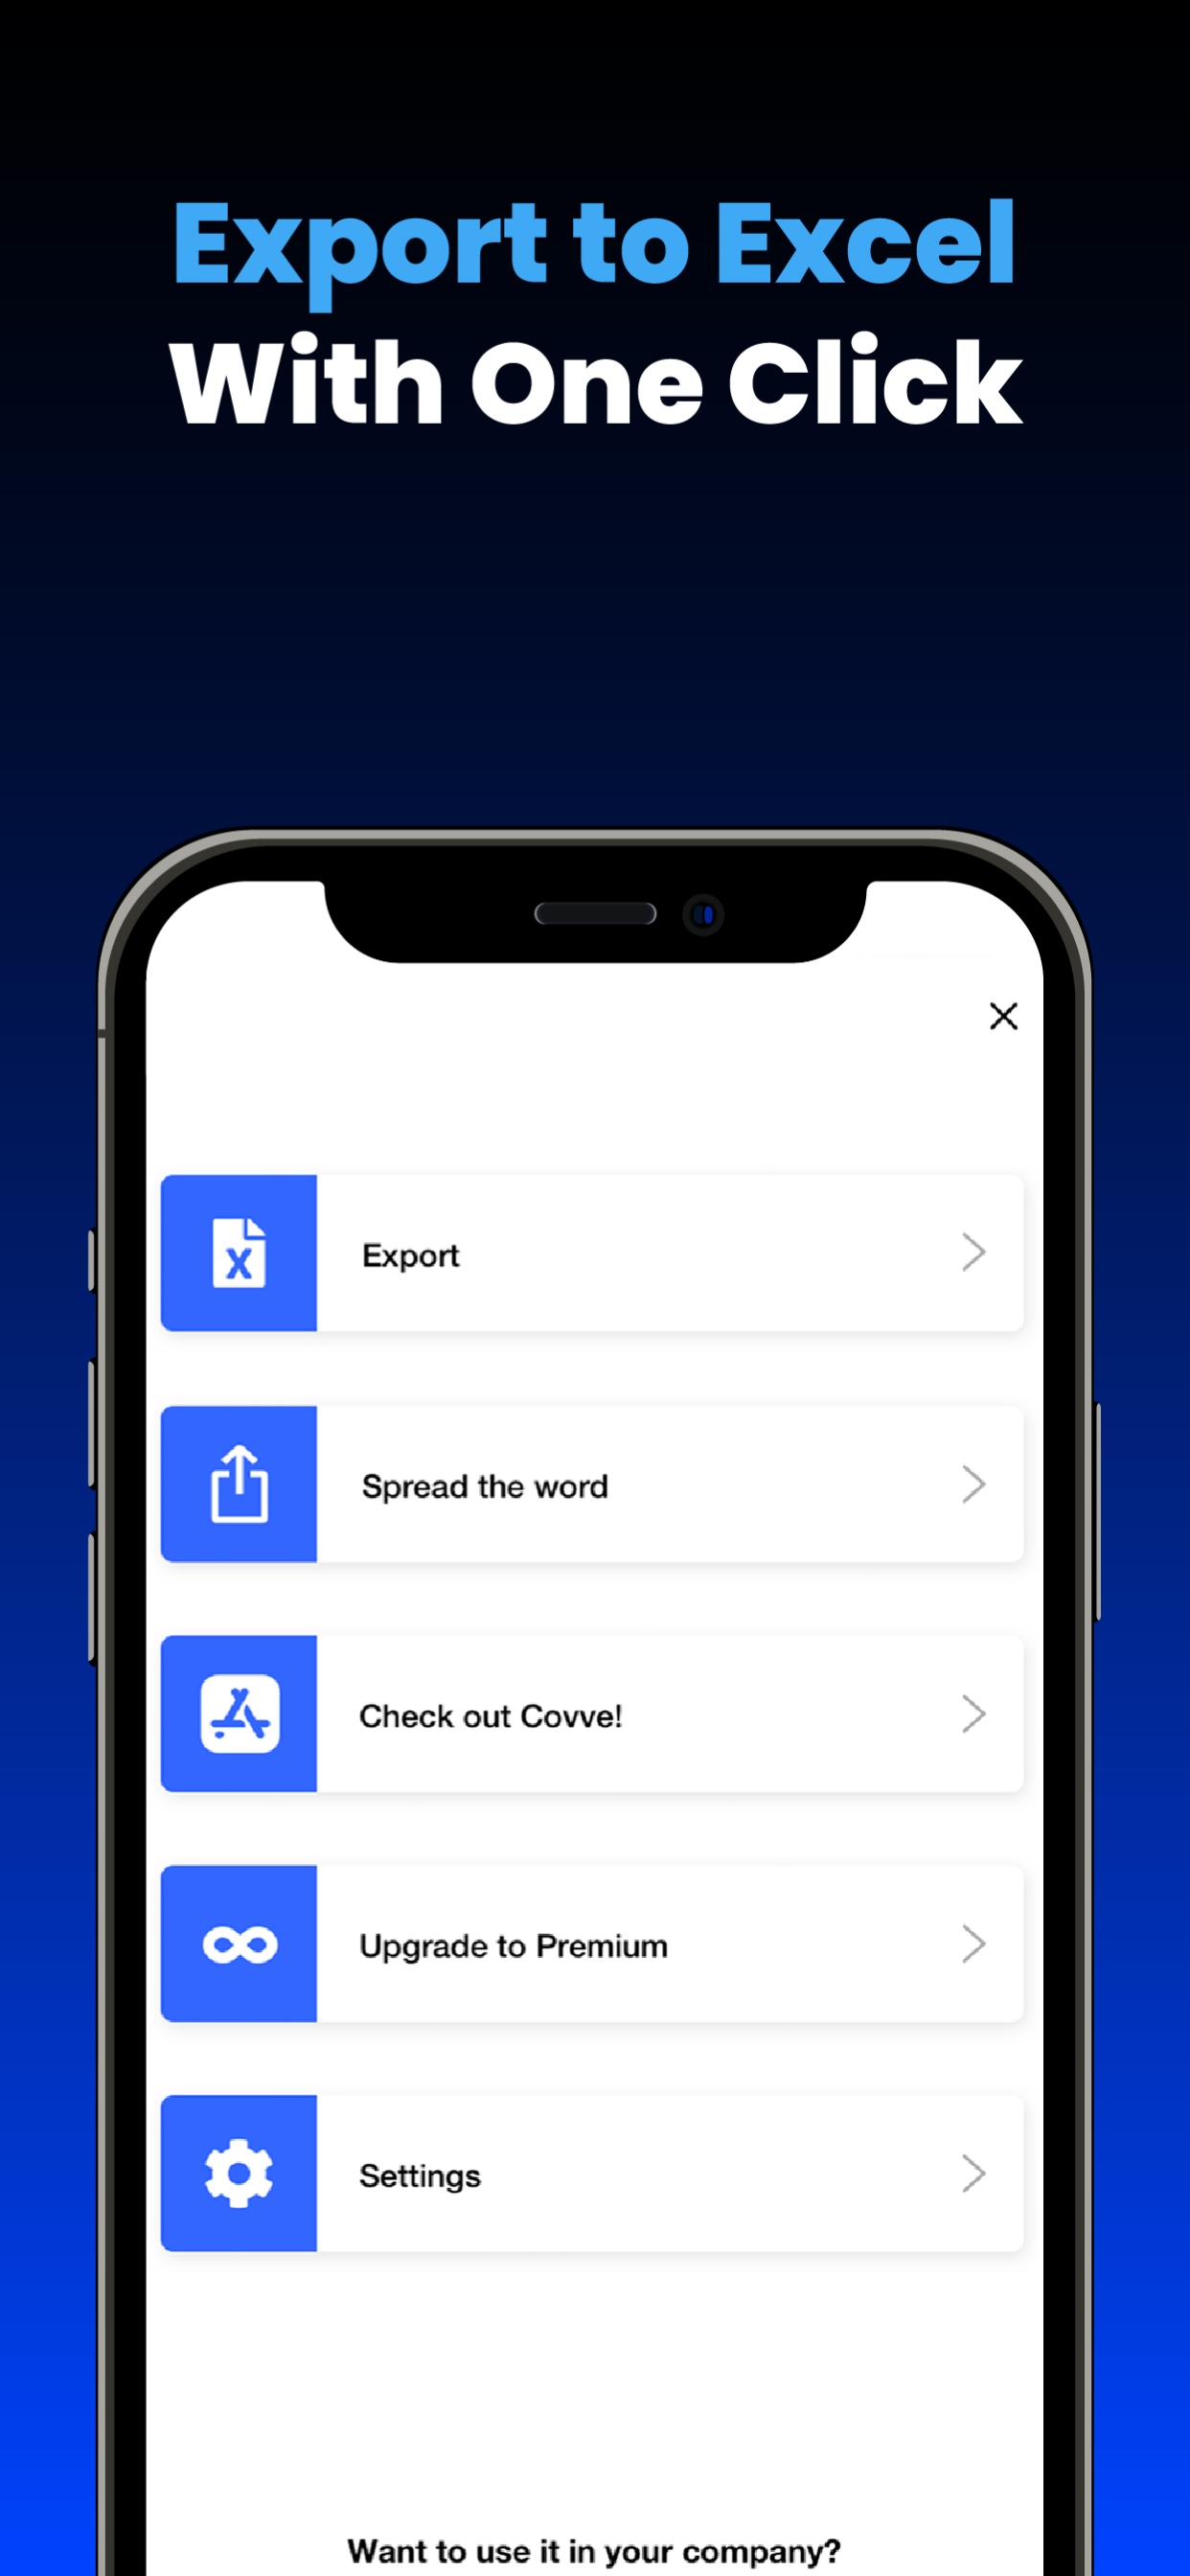 Covve Scan makes it a breeze to share business cards. You can also export your cards to Excel, Gmail, or Outlook with just a tap.